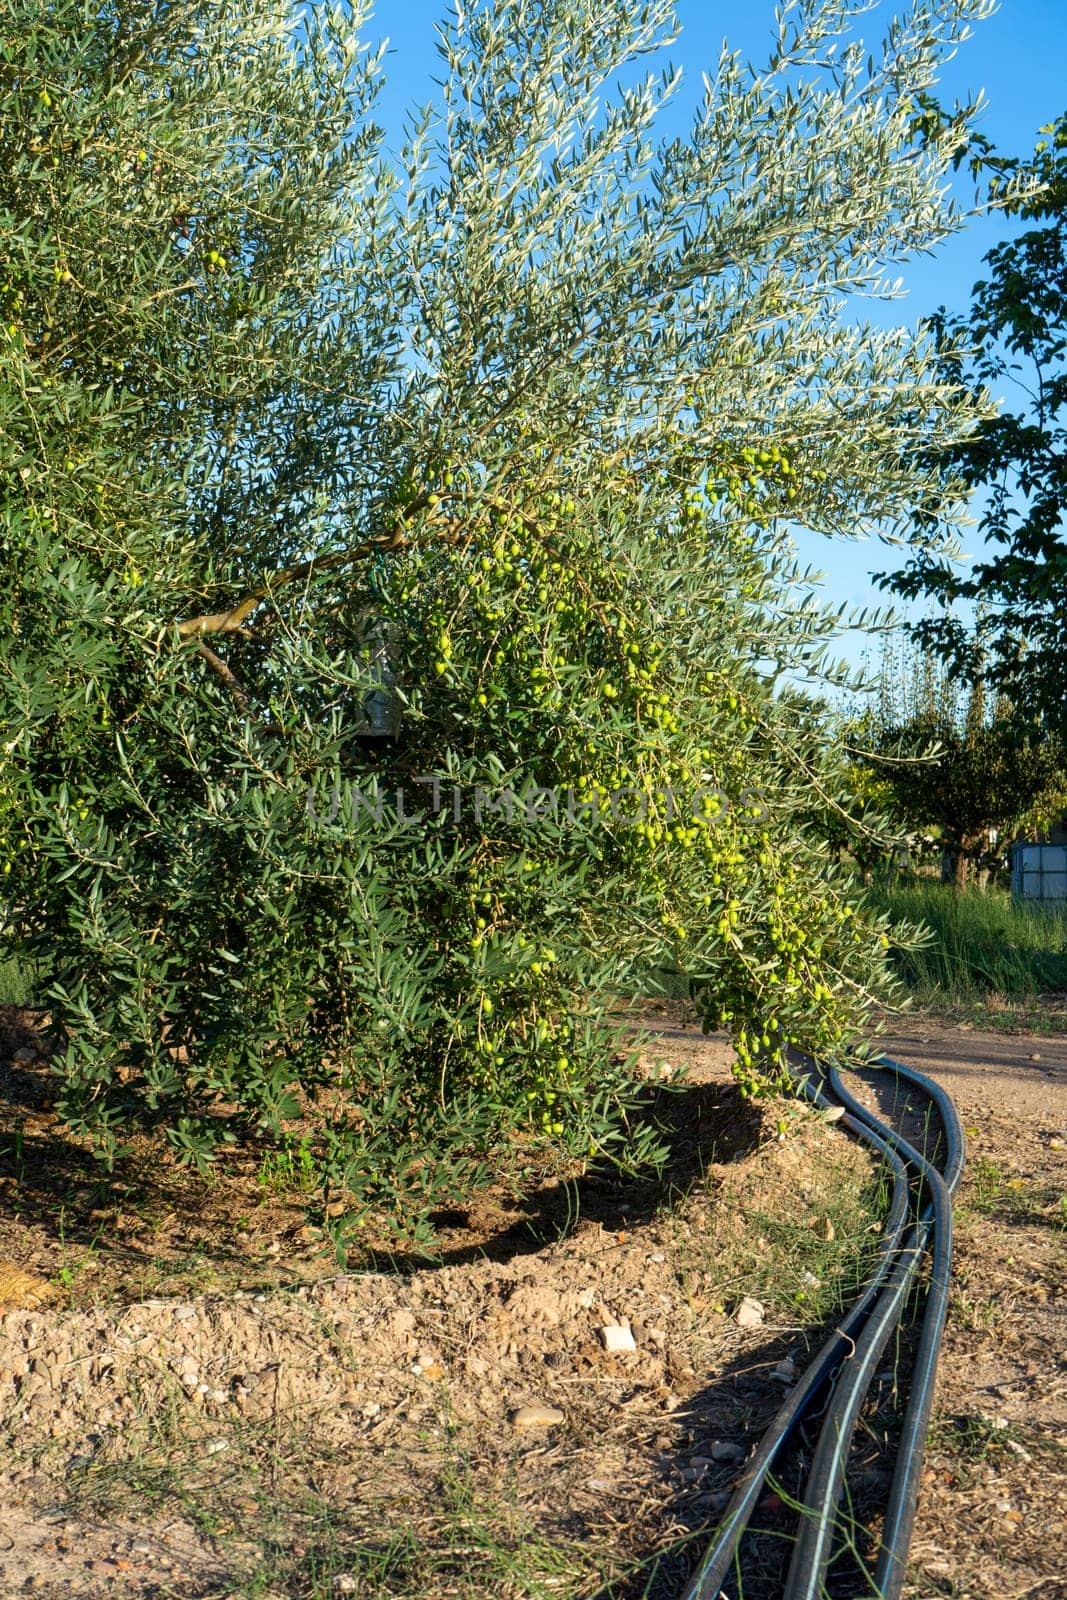 Close-up of an olive tree loaded with many fruits in full development in a crop field.